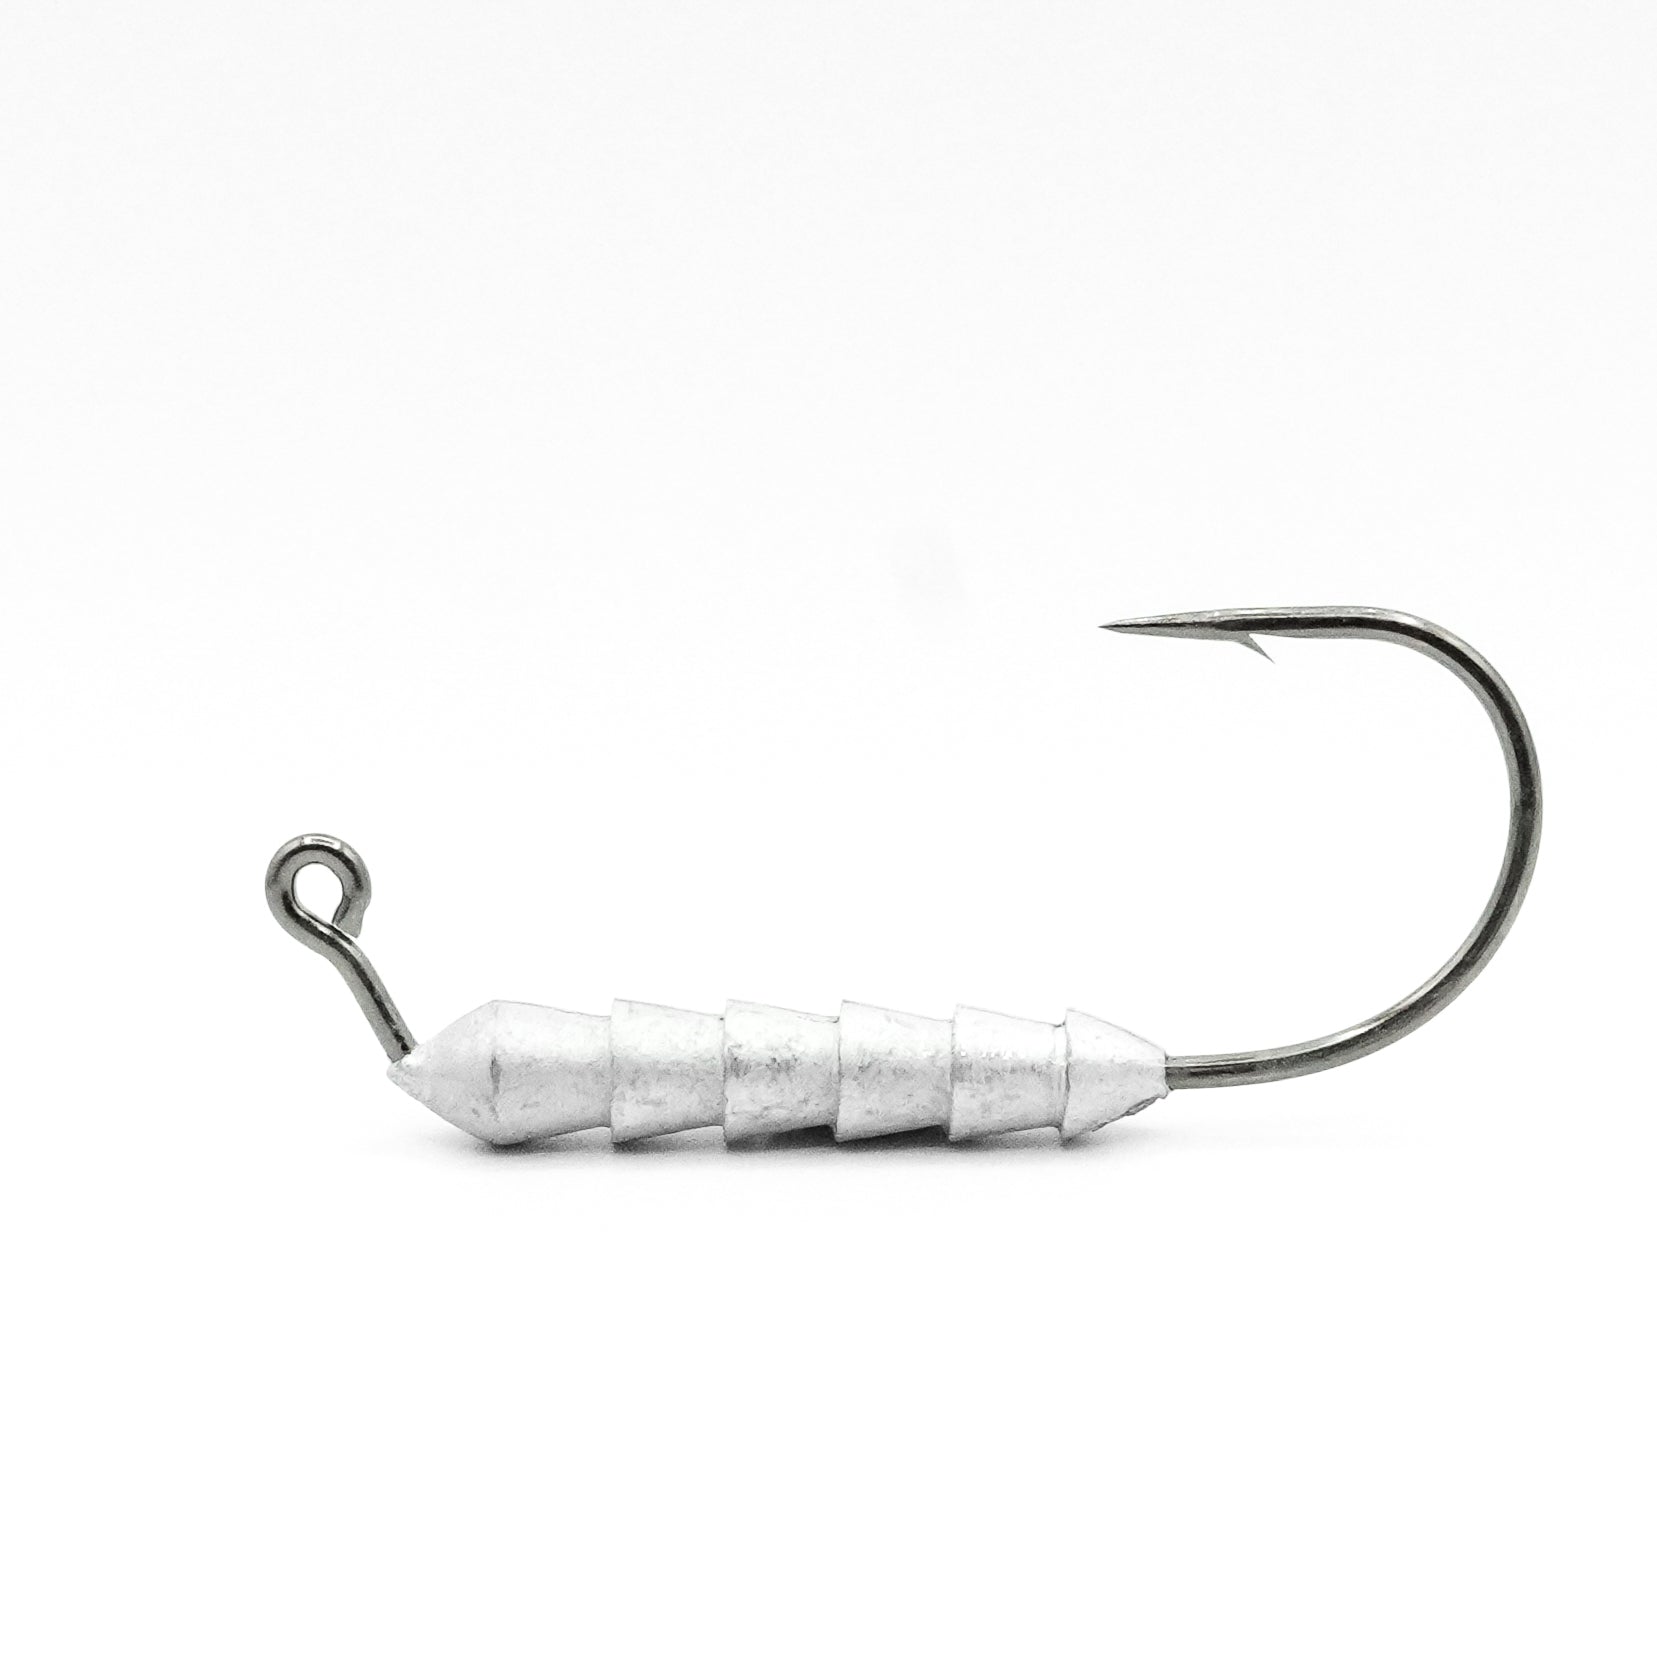 Sportfishtackle.com - Scout Kicker 18 is a super realistic imitation of a  baitfish! This lure features a unique kicker paddle that mimics the  realistic gait of a baitfish. With this micro-vibrating paddle